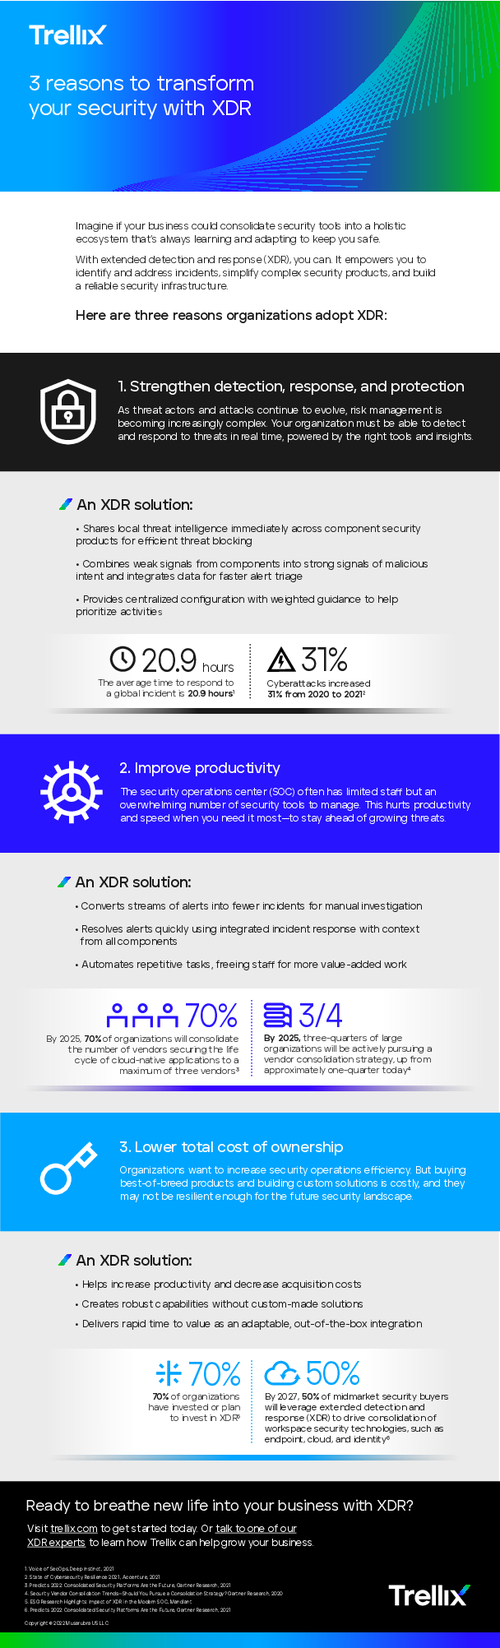 3 Reasons To Transform Your Security With XDR